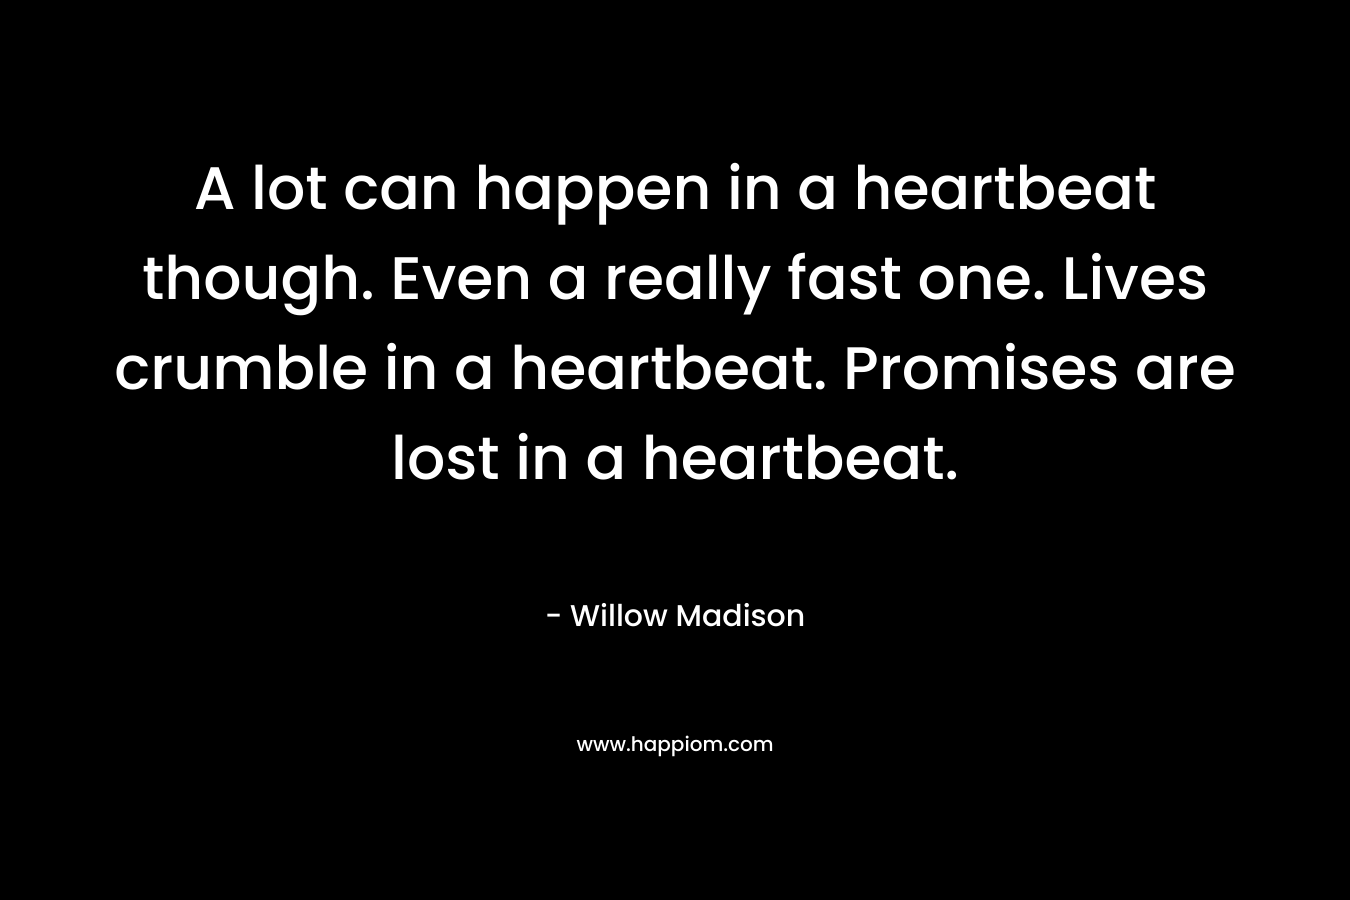 A lot can happen in a heartbeat though. Even a really fast one. Lives crumble in a heartbeat. Promises are lost in a heartbeat. – Willow Madison